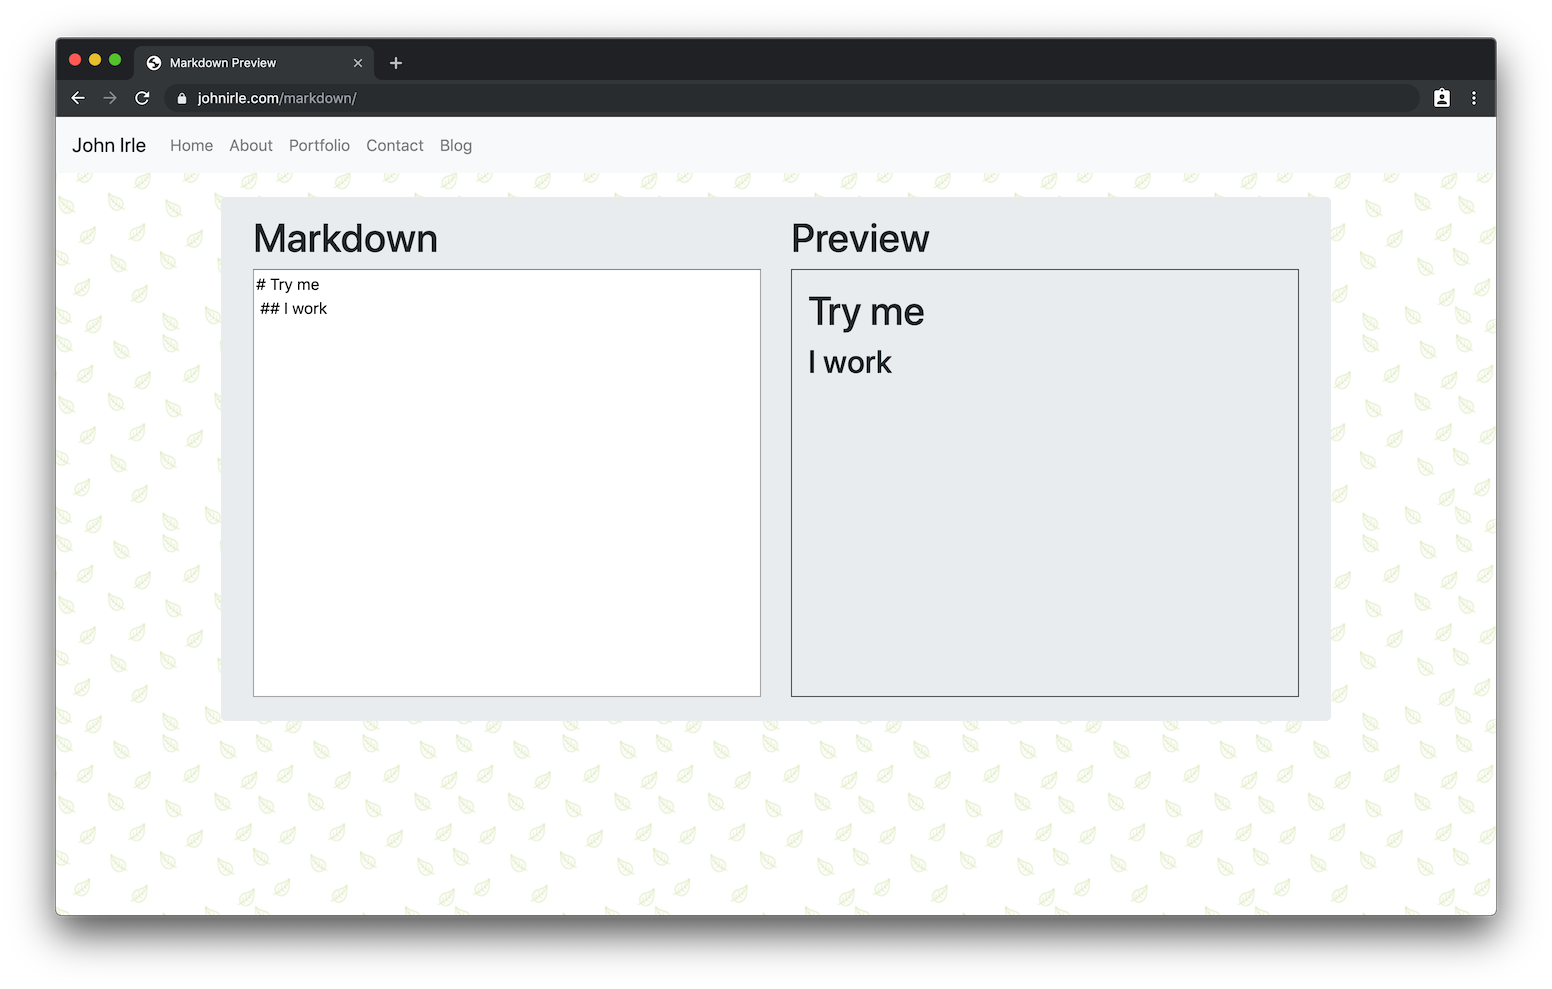 Markdown Previewer